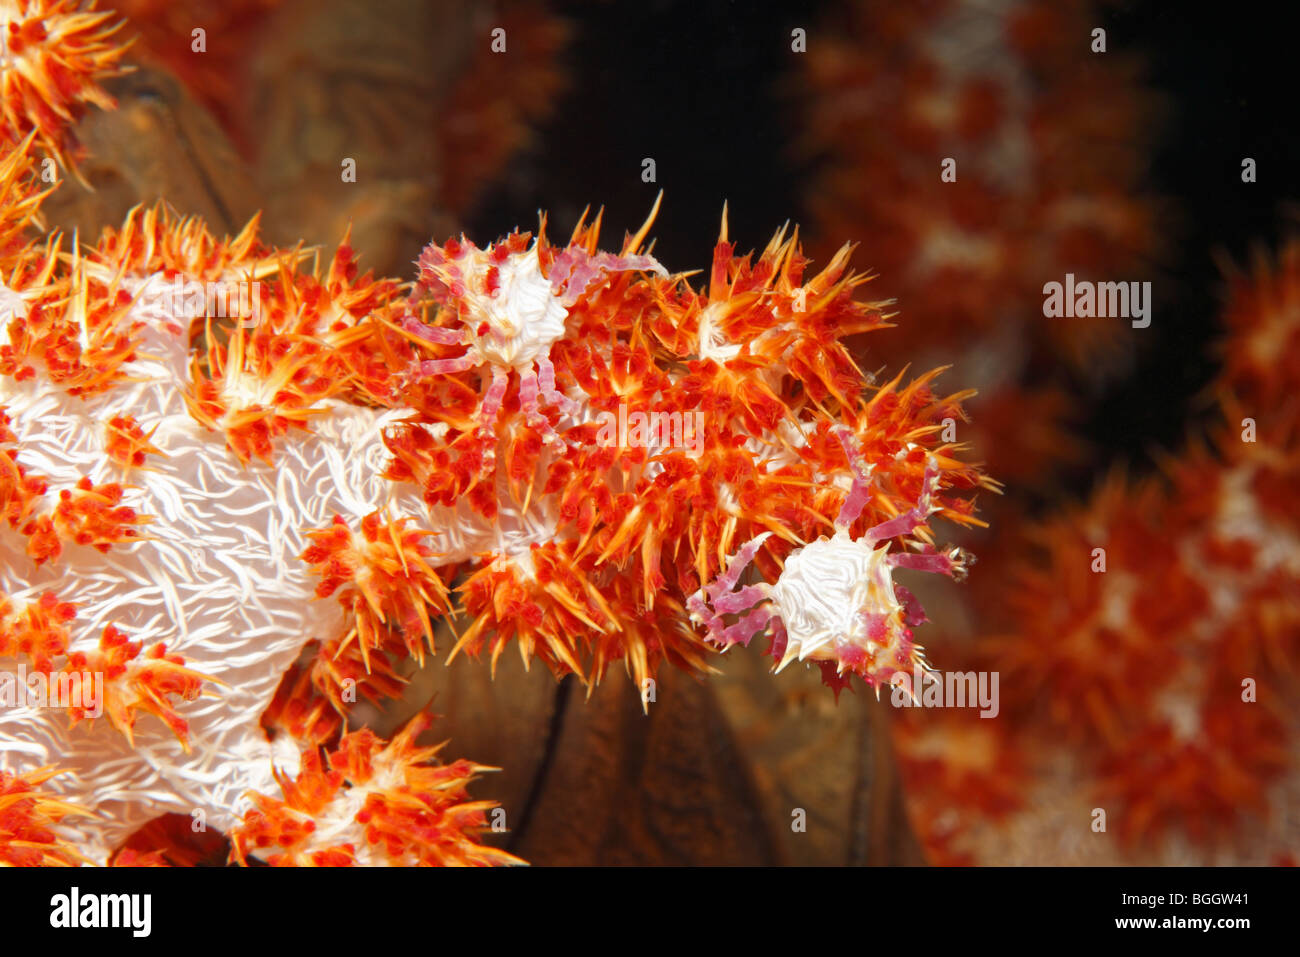 Two Soft Coral Crabs, also called Candy Crabs or decorator Crabs, Hoplophrys oatesii, camouflaged on soft coral, Dendronephthya Stock Photo